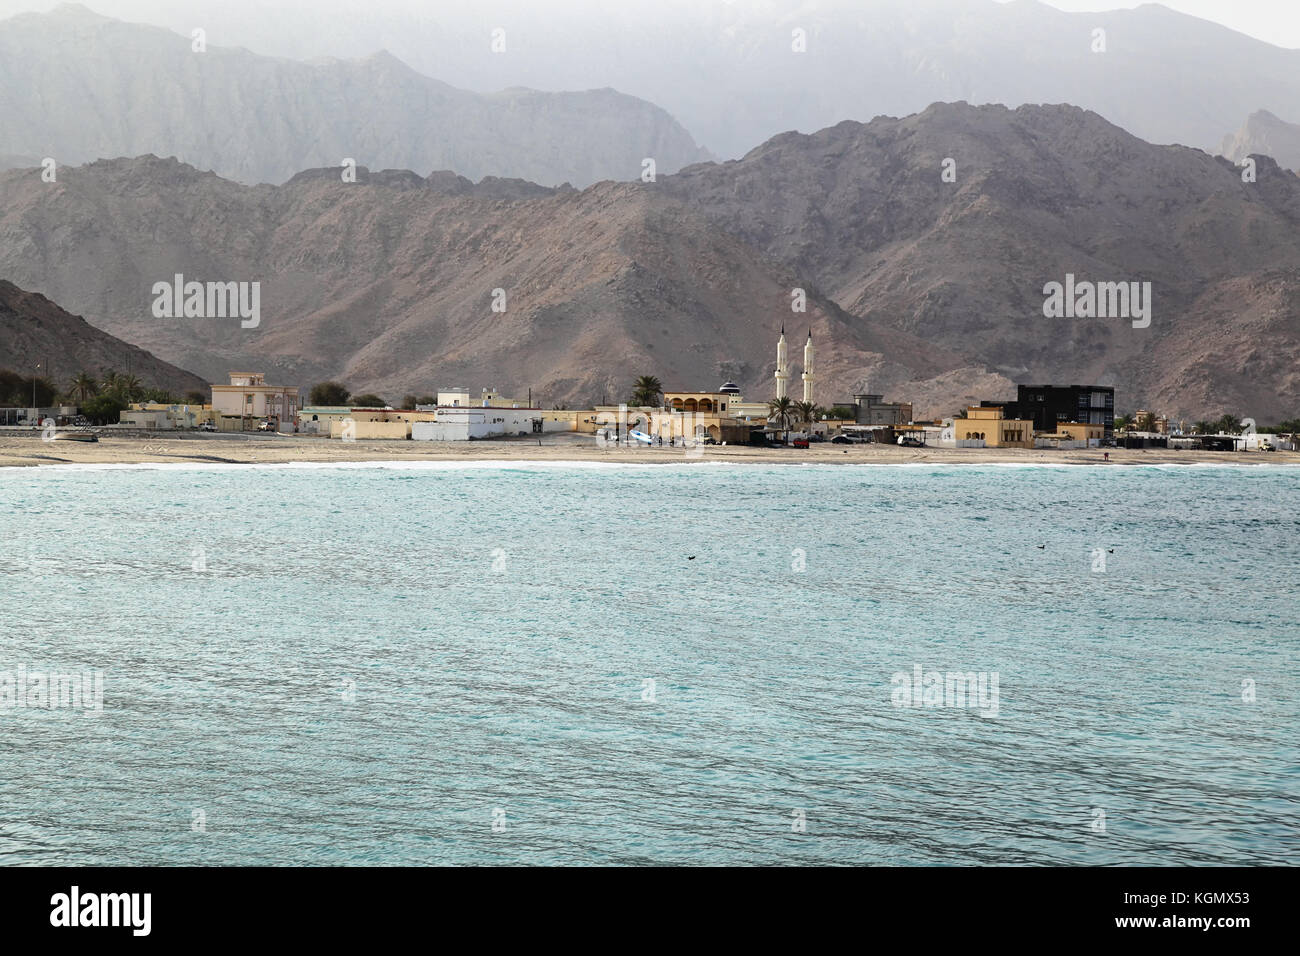 View on a empty beach in Oman with mosque and traditional arabic architecture,  Al Hajar Mountains at the background Stock Photo